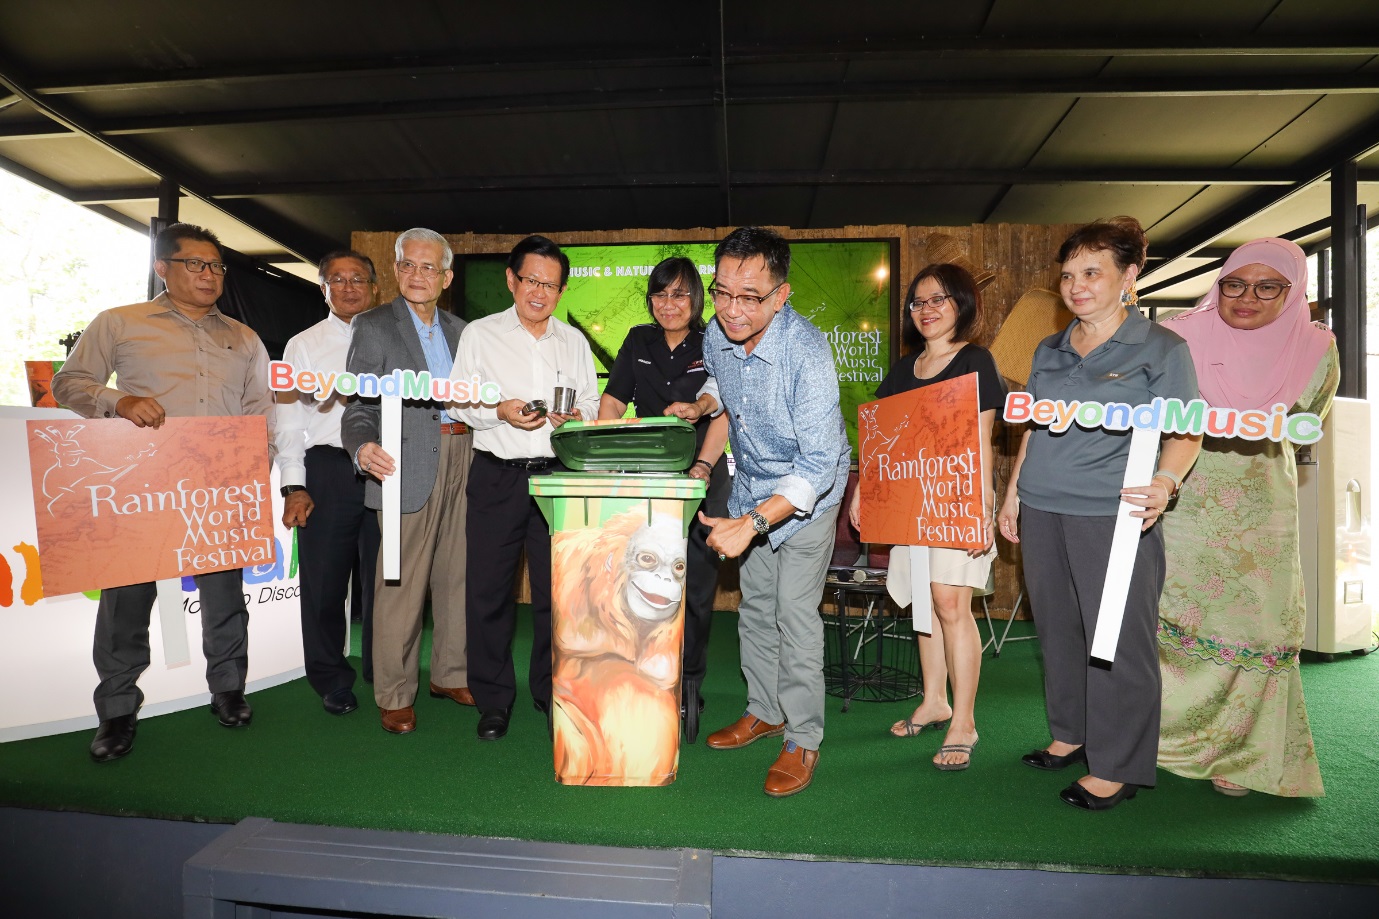 Image shows Minister of Tourism, Arts, Culture, Youth and Sport Datuk Haji Abdul Karim Rahman Hamzah (centre) next to one of the decorated recycle bins that will be at the RWMF. Second on his right, Assistant Minister of Tourism, Arts and Culture YB Lee Kim Shin is holding the limited RWMF collapsible cup. Also in the photo (from left) Board of Director for STB Tuan Haji Mohammad Ibrahim Nordin, CEO of STB Sharzede Datu Hj Salleh Askor, Principle Assistant Secretary Yusfida Binti Khalid